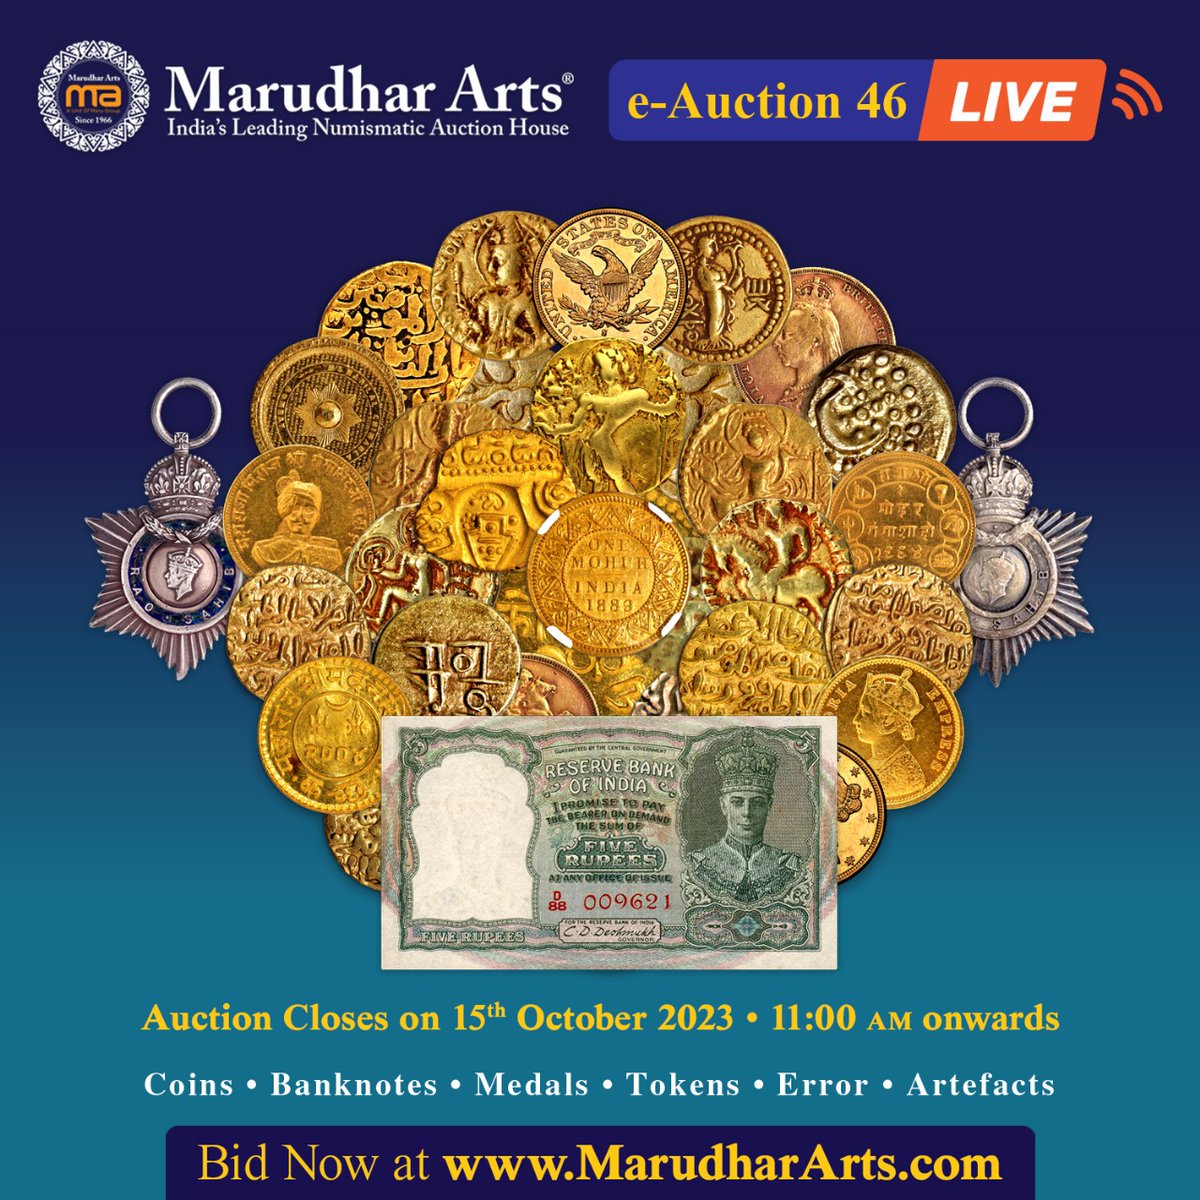 Marudhar Arts e-Auction No 46 is Live & Ready to Accept Your Bids at MarudharArts.com

#NumismaticAuction
#CollectiblesAuction
#RareCoinsAuction
#CurrencyAuction
#BanknoteAuction
#AuctionHouse
#HistoricalCoins
#VintageCurrency
#AuctionTreasures
#NumismaticCollectibles